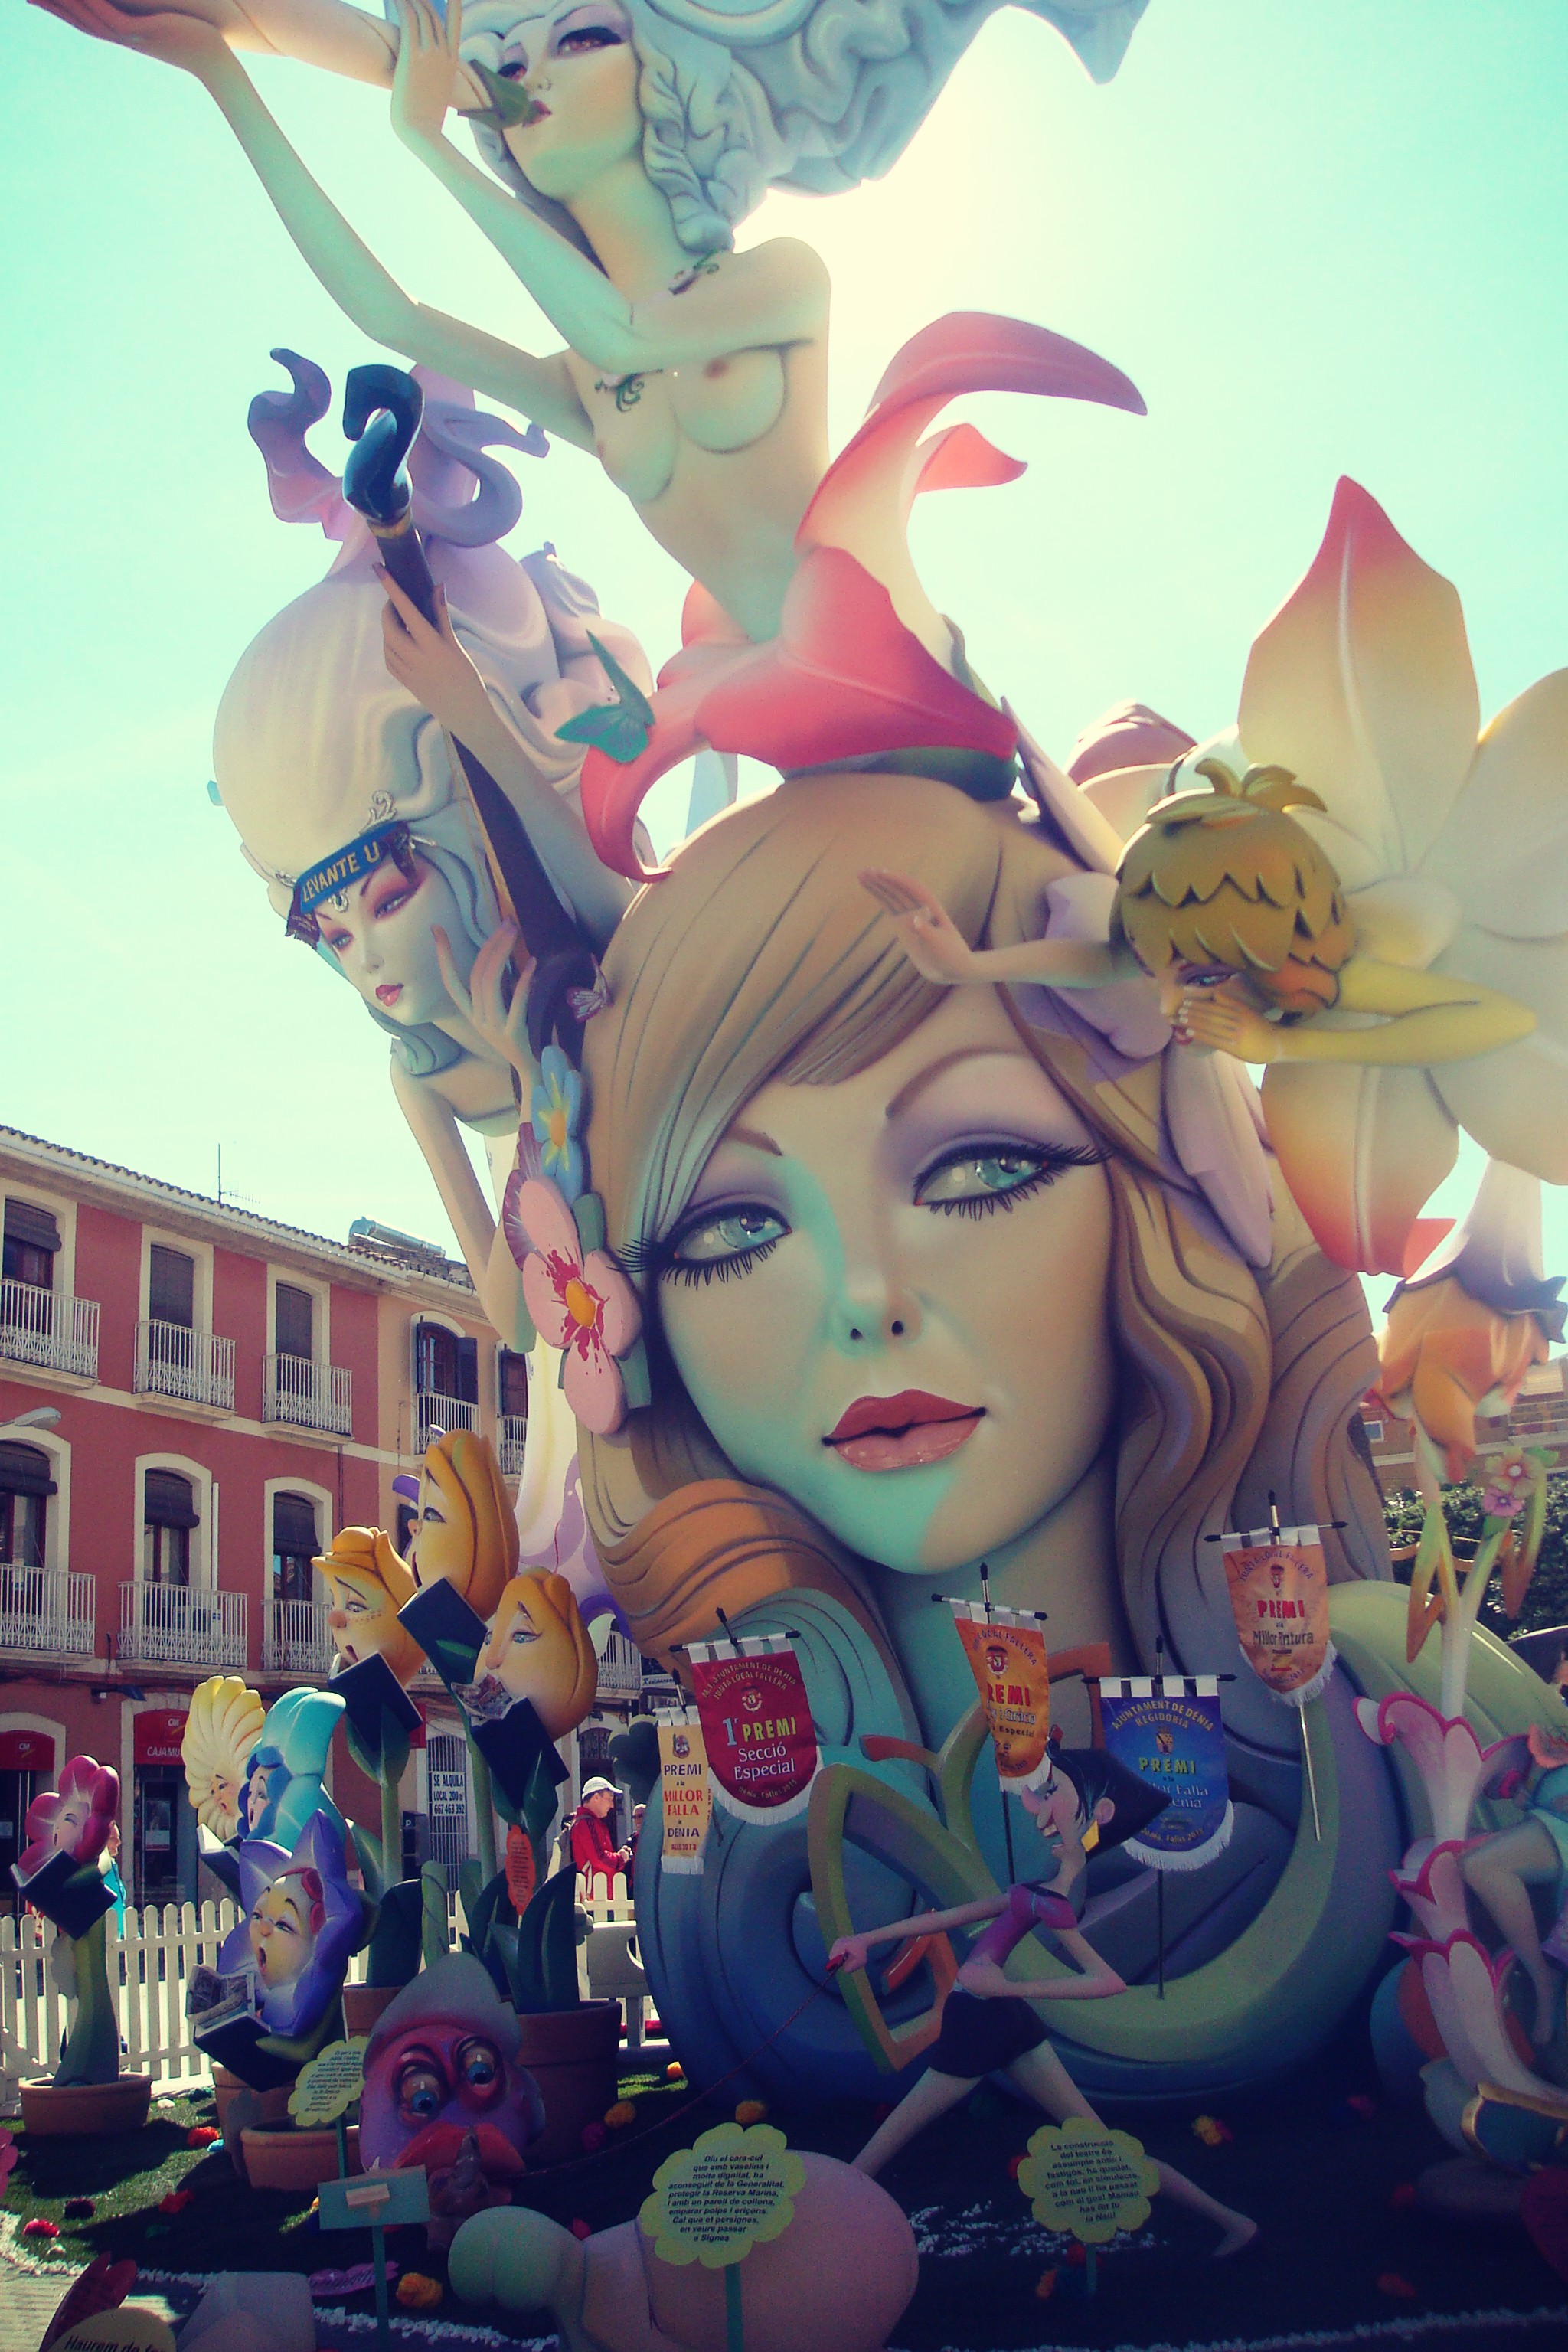 The Fallas Intangible Heritage of Humanity of UNESCO